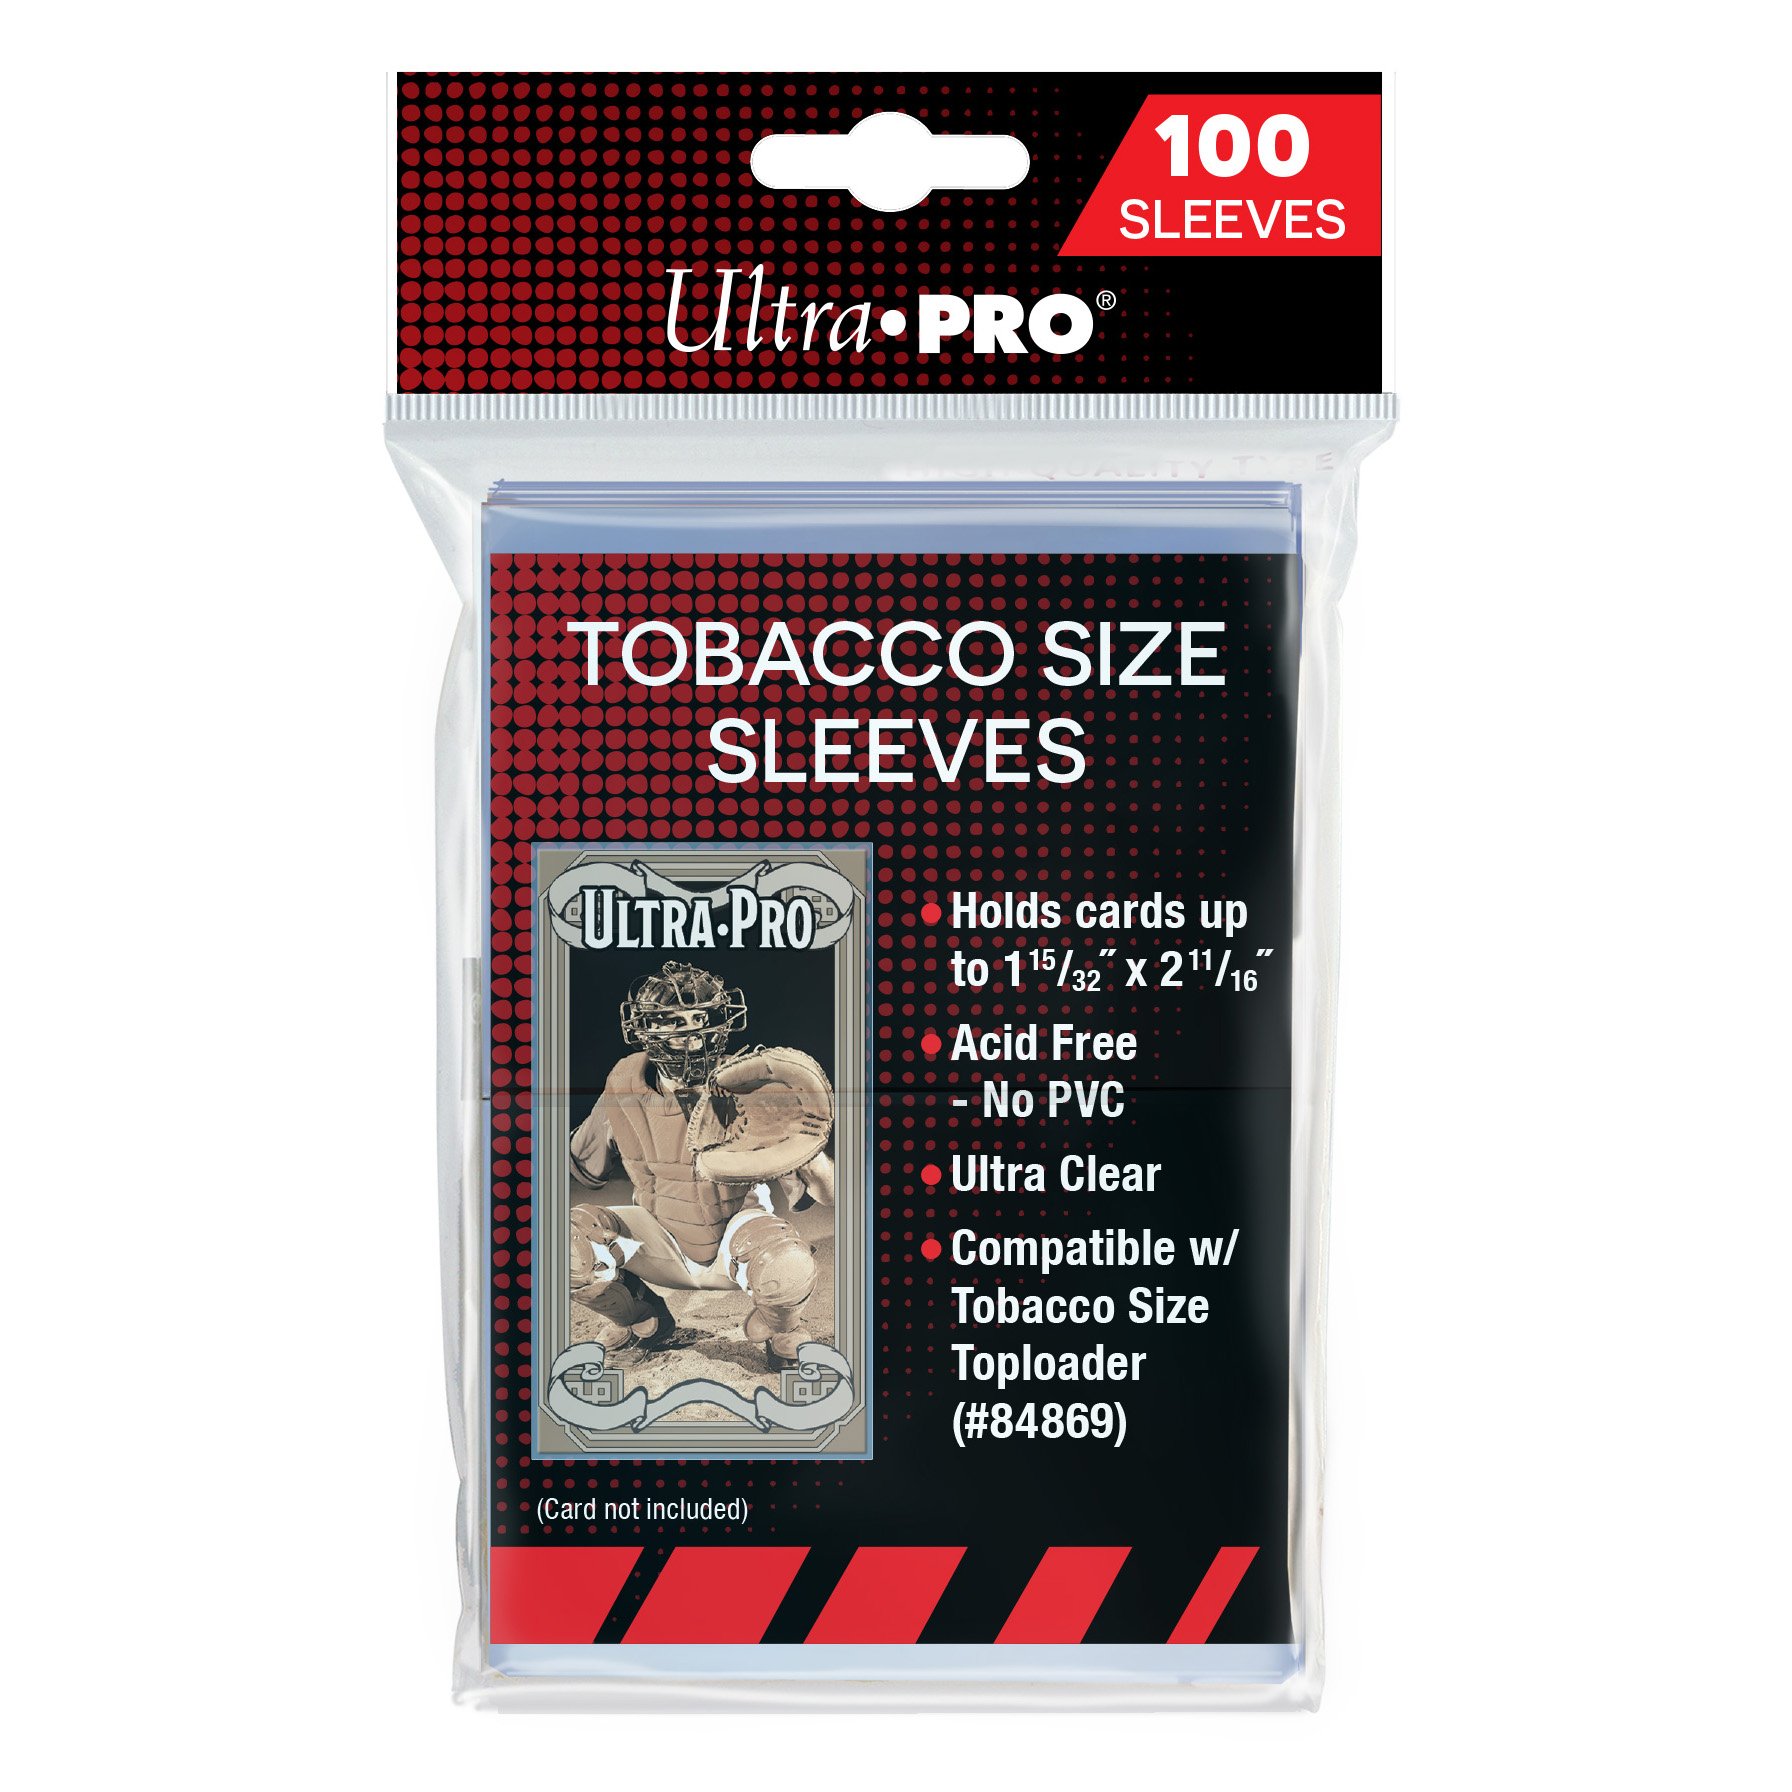 Ultra Pro Tobacco Size Sleeves - 100ct